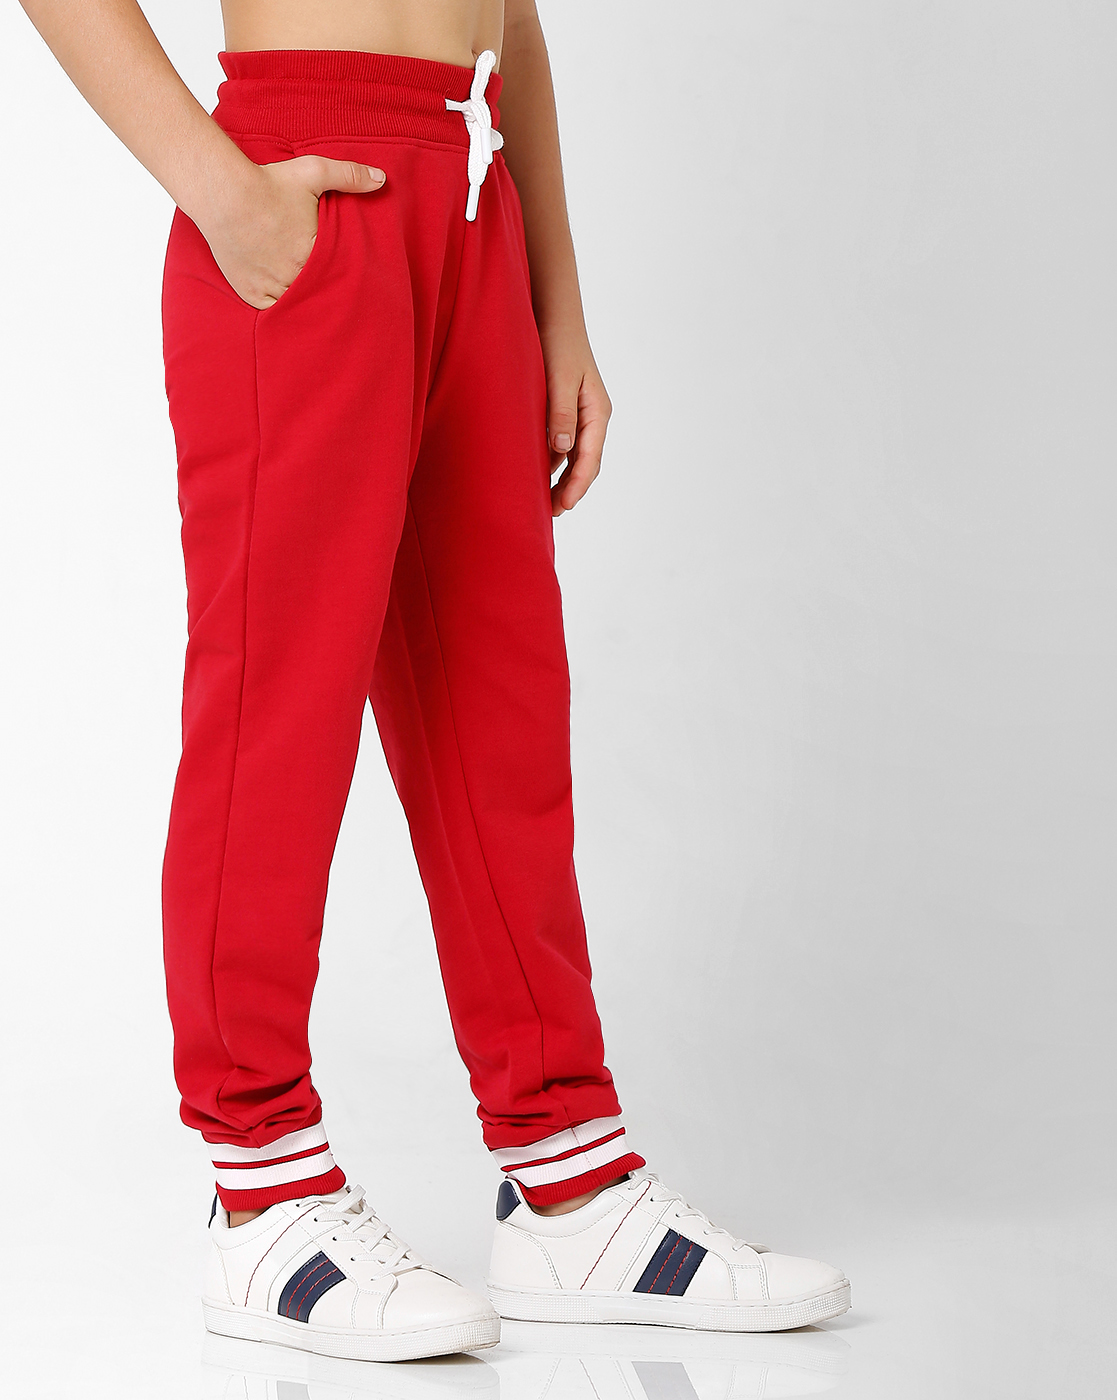 GAS KIDS Boys Solid Red Trackpants